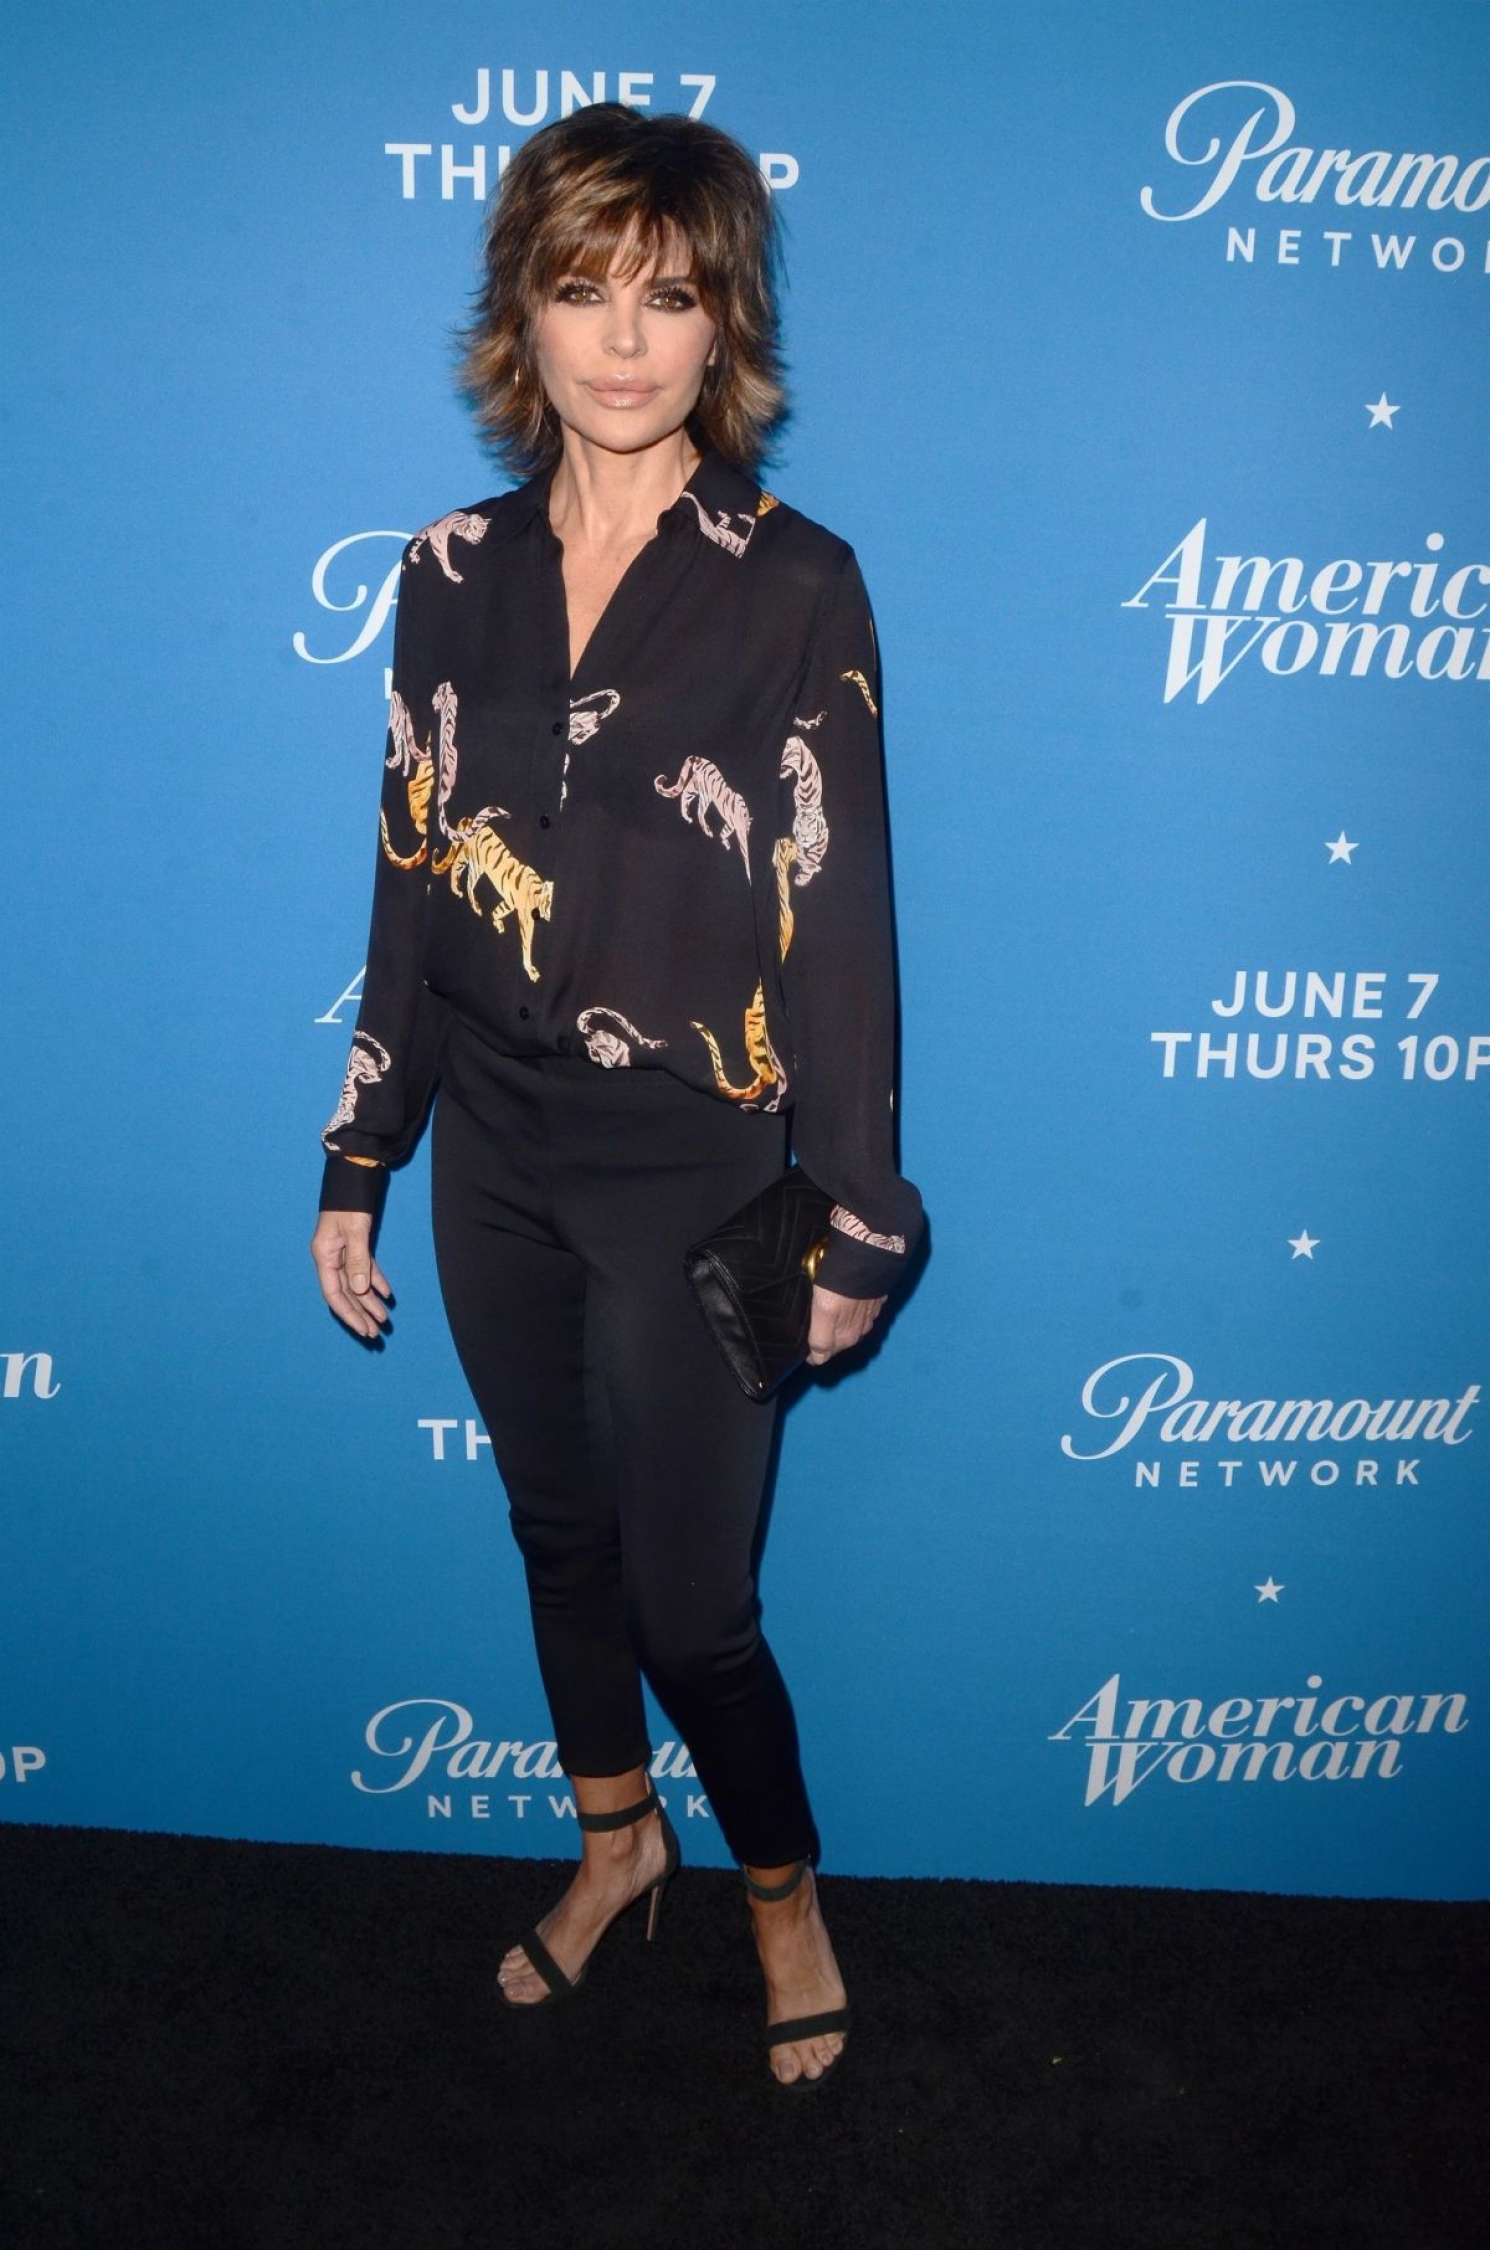 Lisa Rinna Photocall For American Woman Premiere Party In Los Angeles